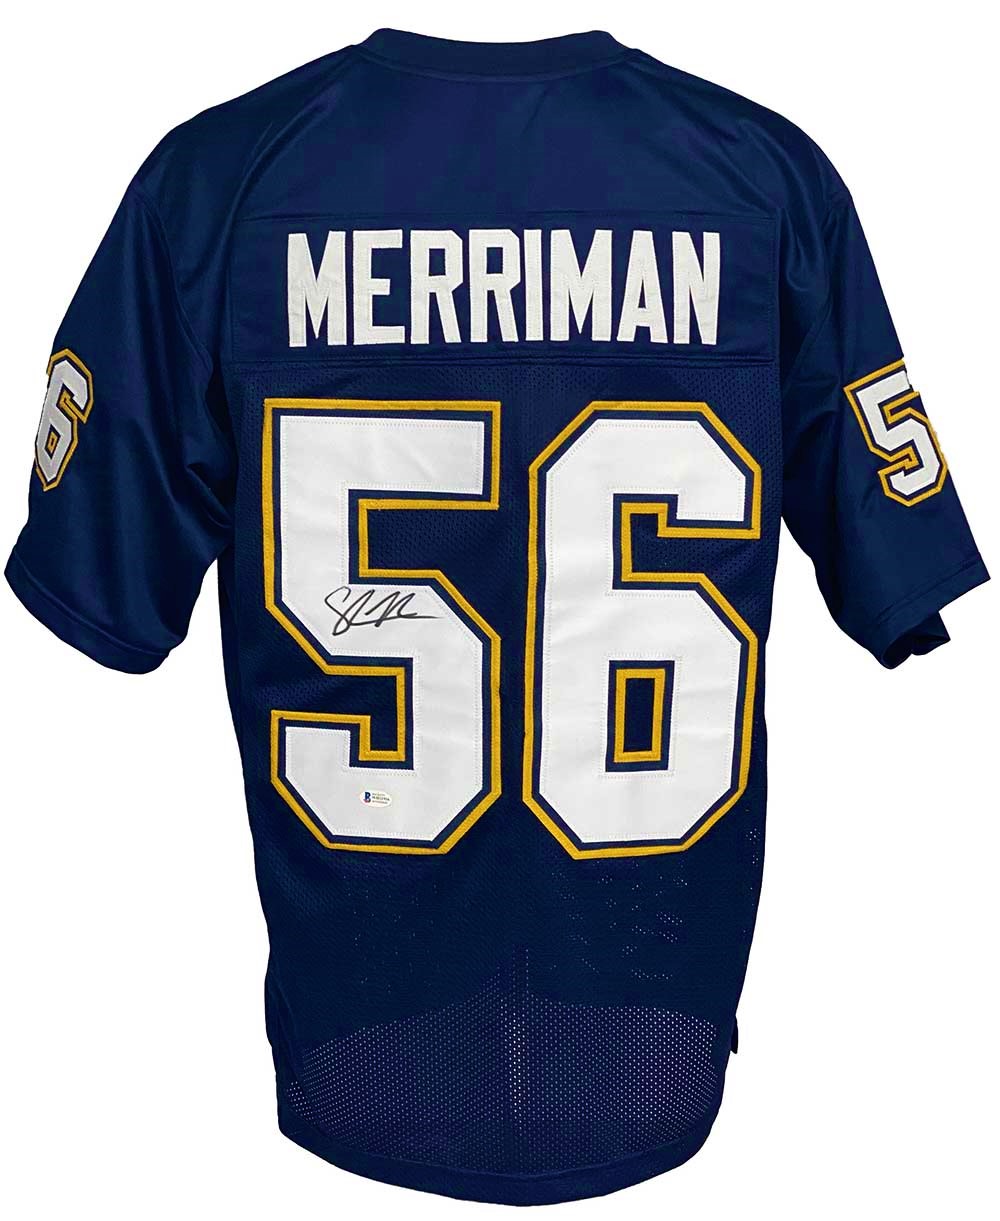 Los Angeles Chargers Shawne Merriman Autographed Pro Style Navy